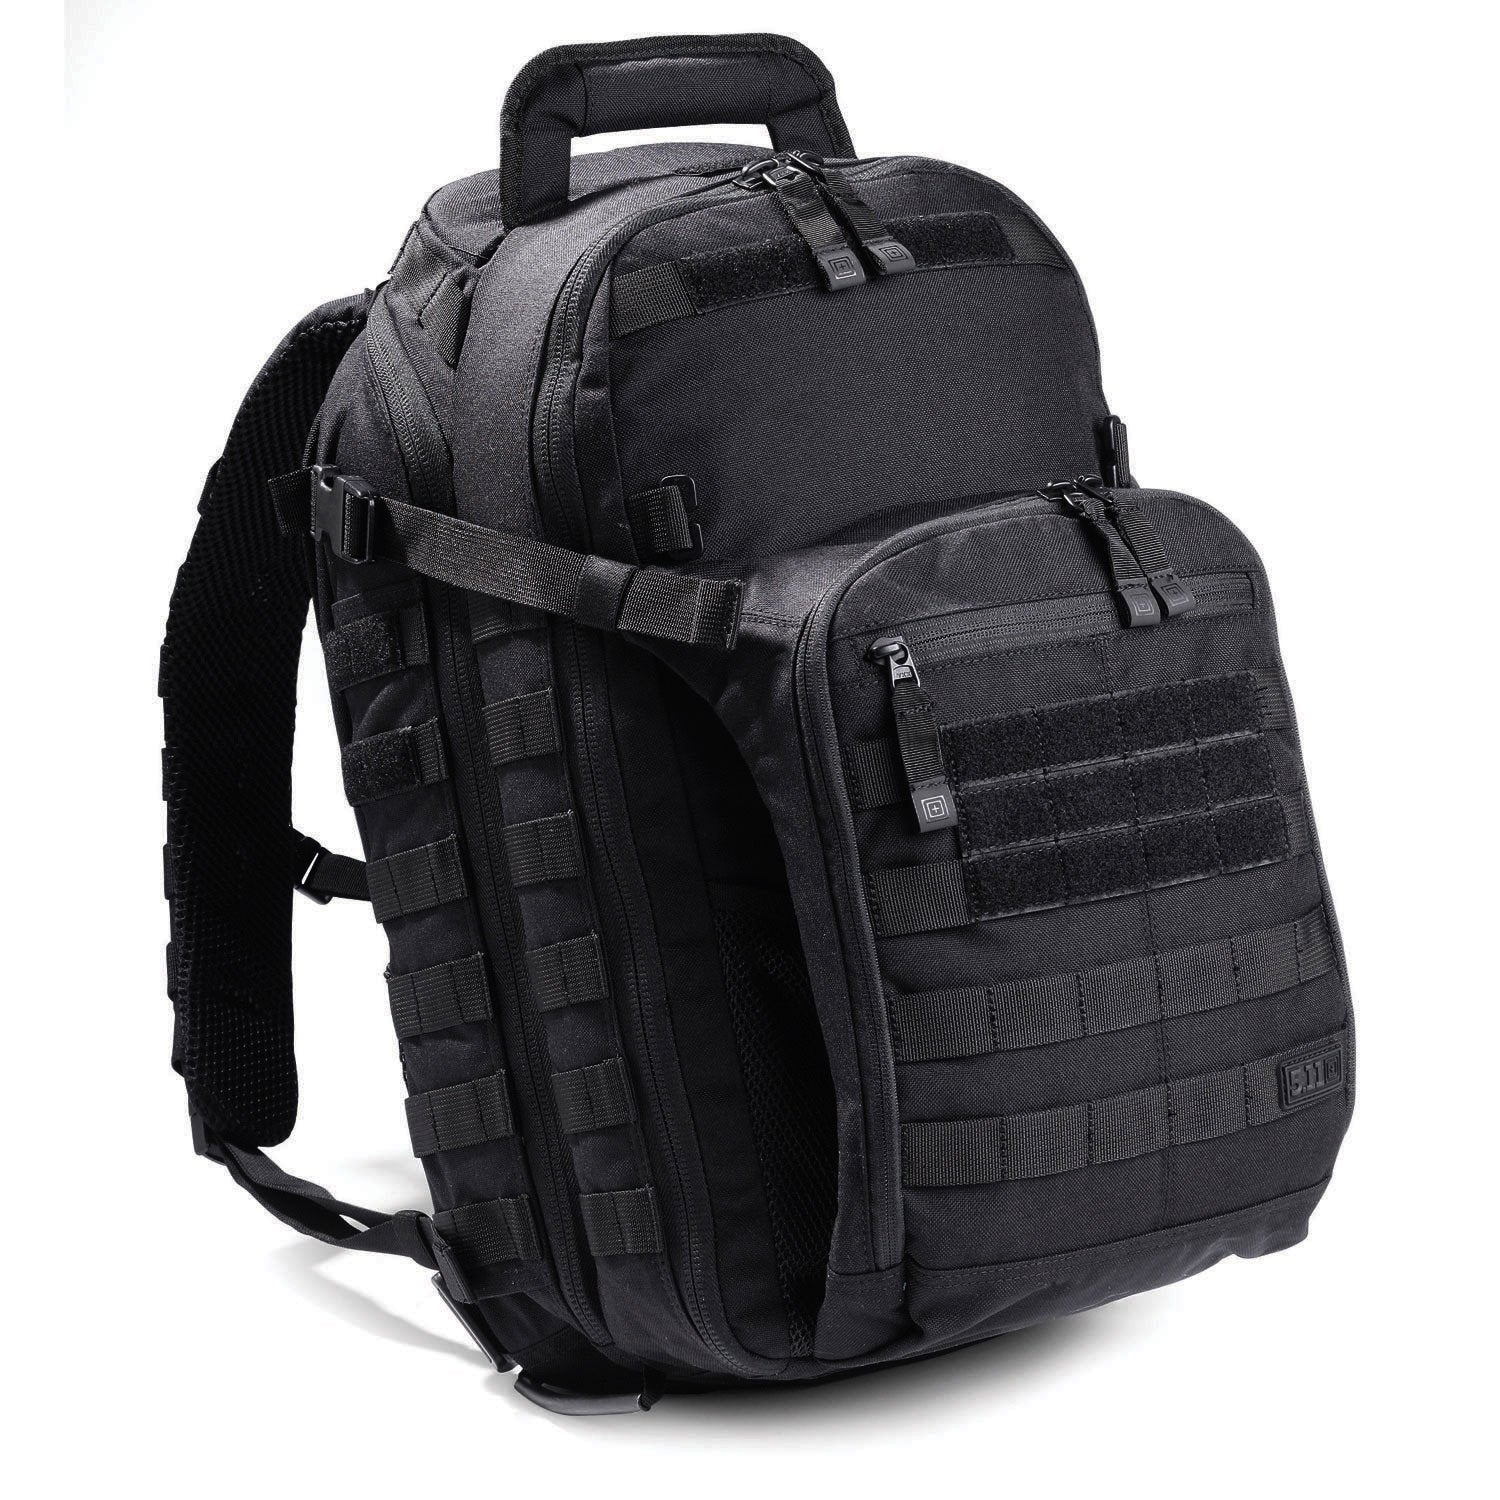 5.11 Tactical All Hazards Prime 29 L Backpack Black Gear Australia by G8